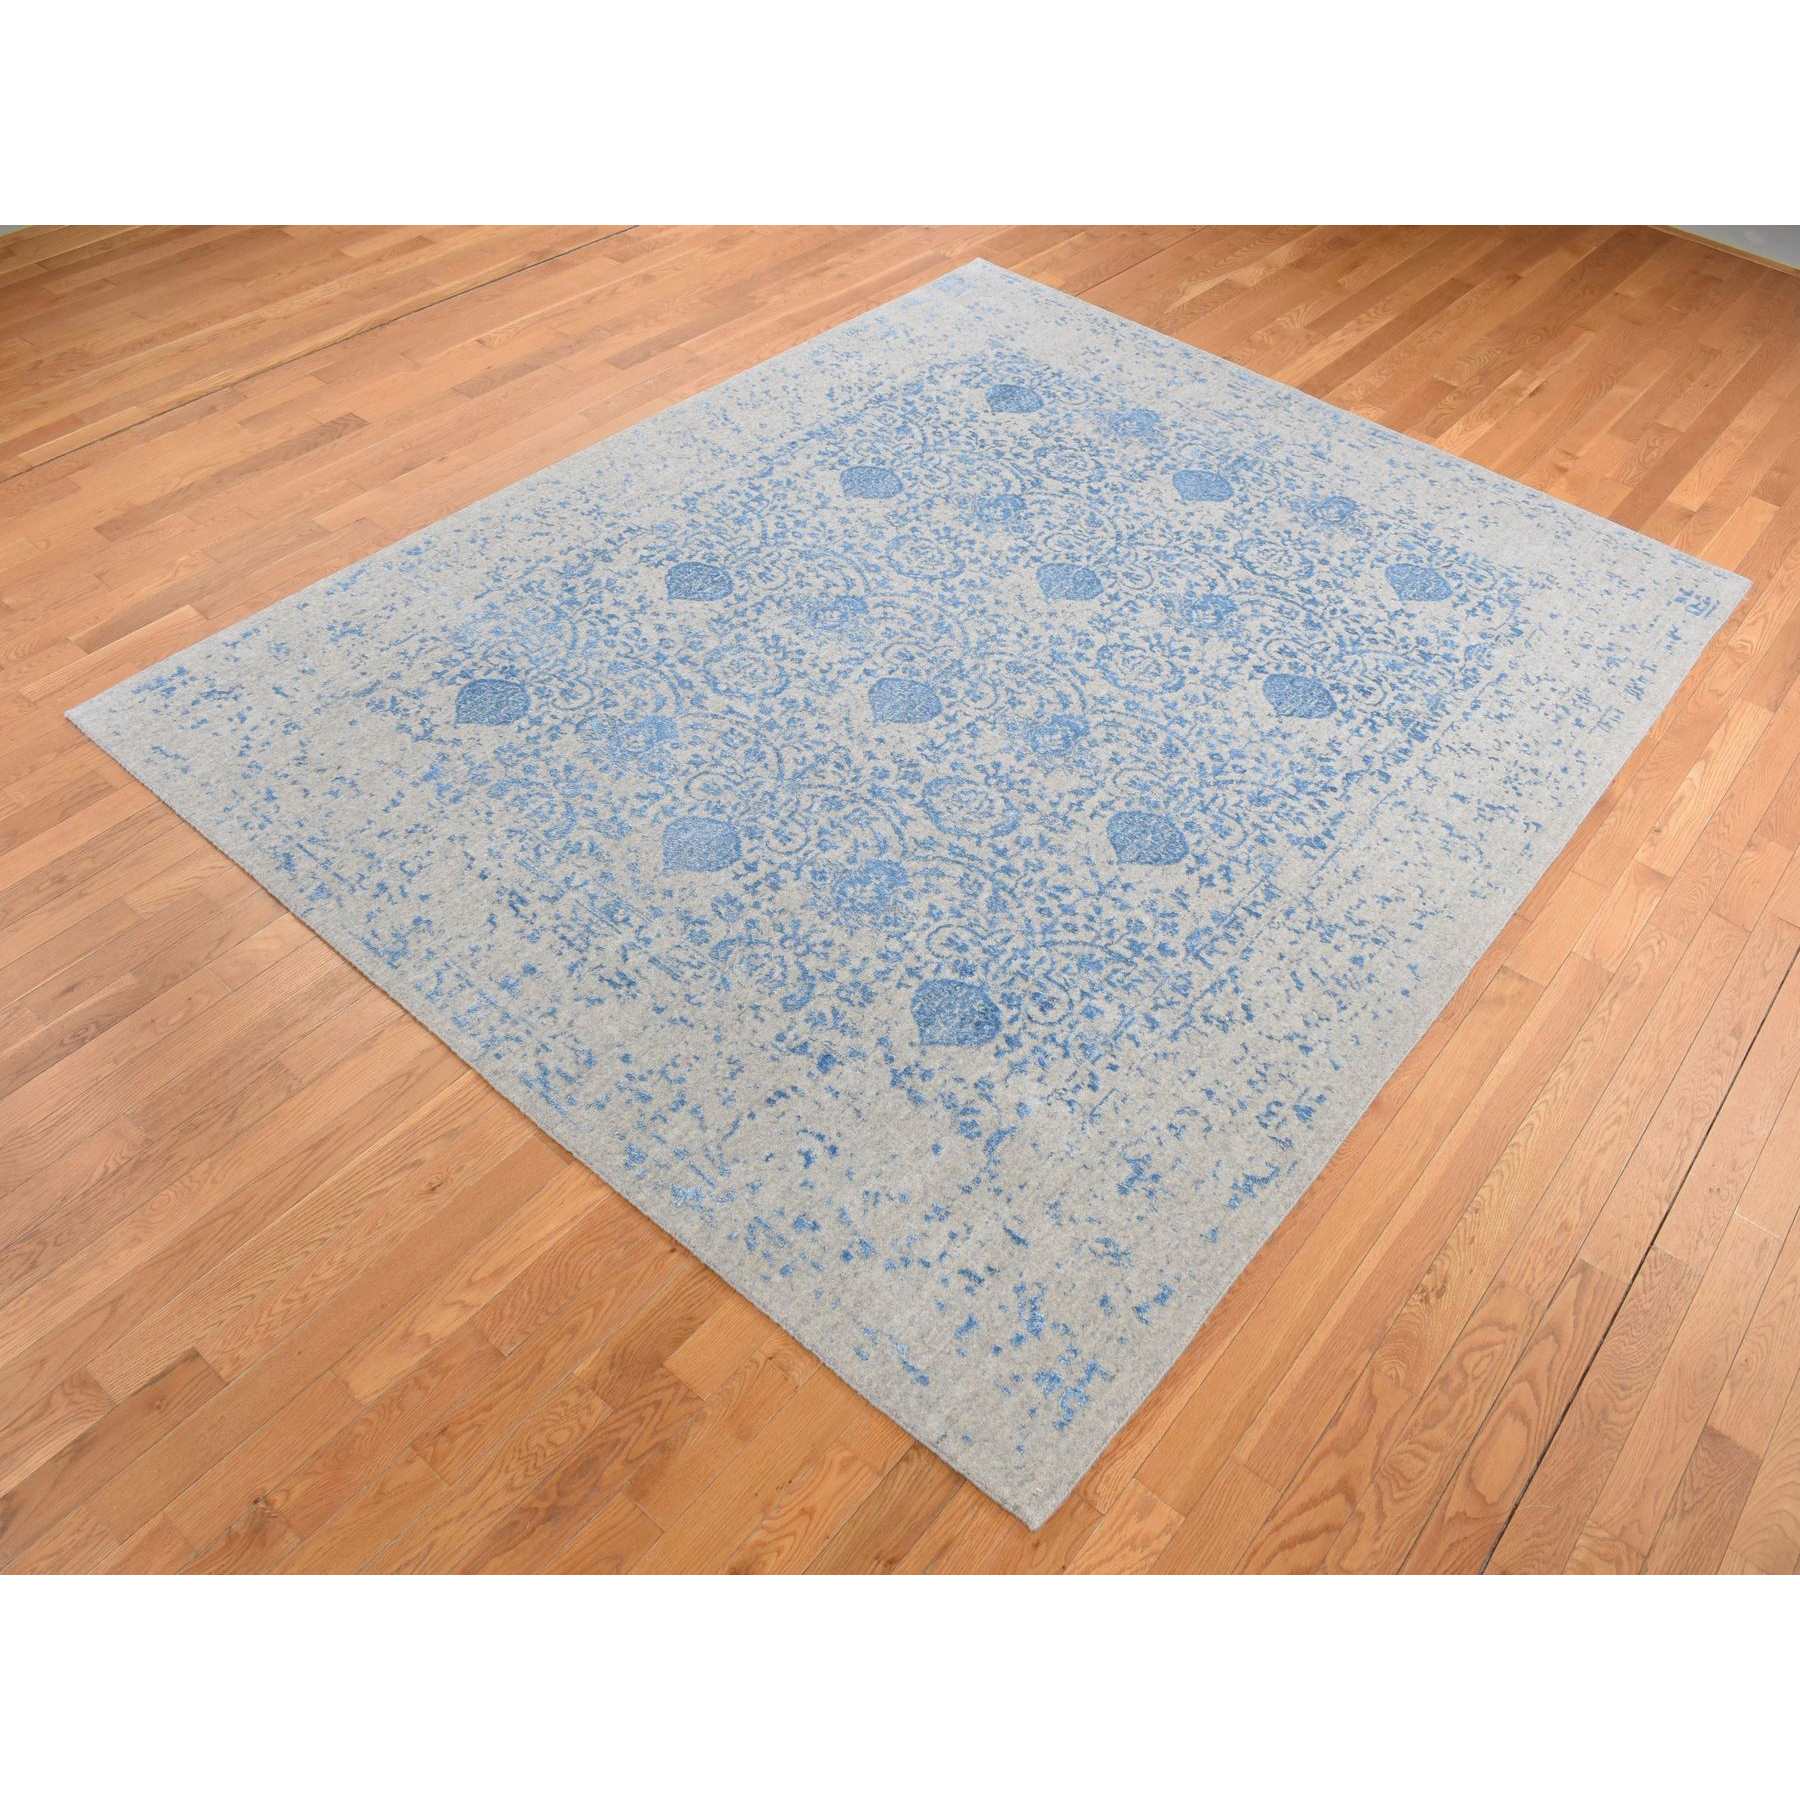 Modern-and-Contemporary-Hand-Loomed-Rug-435290